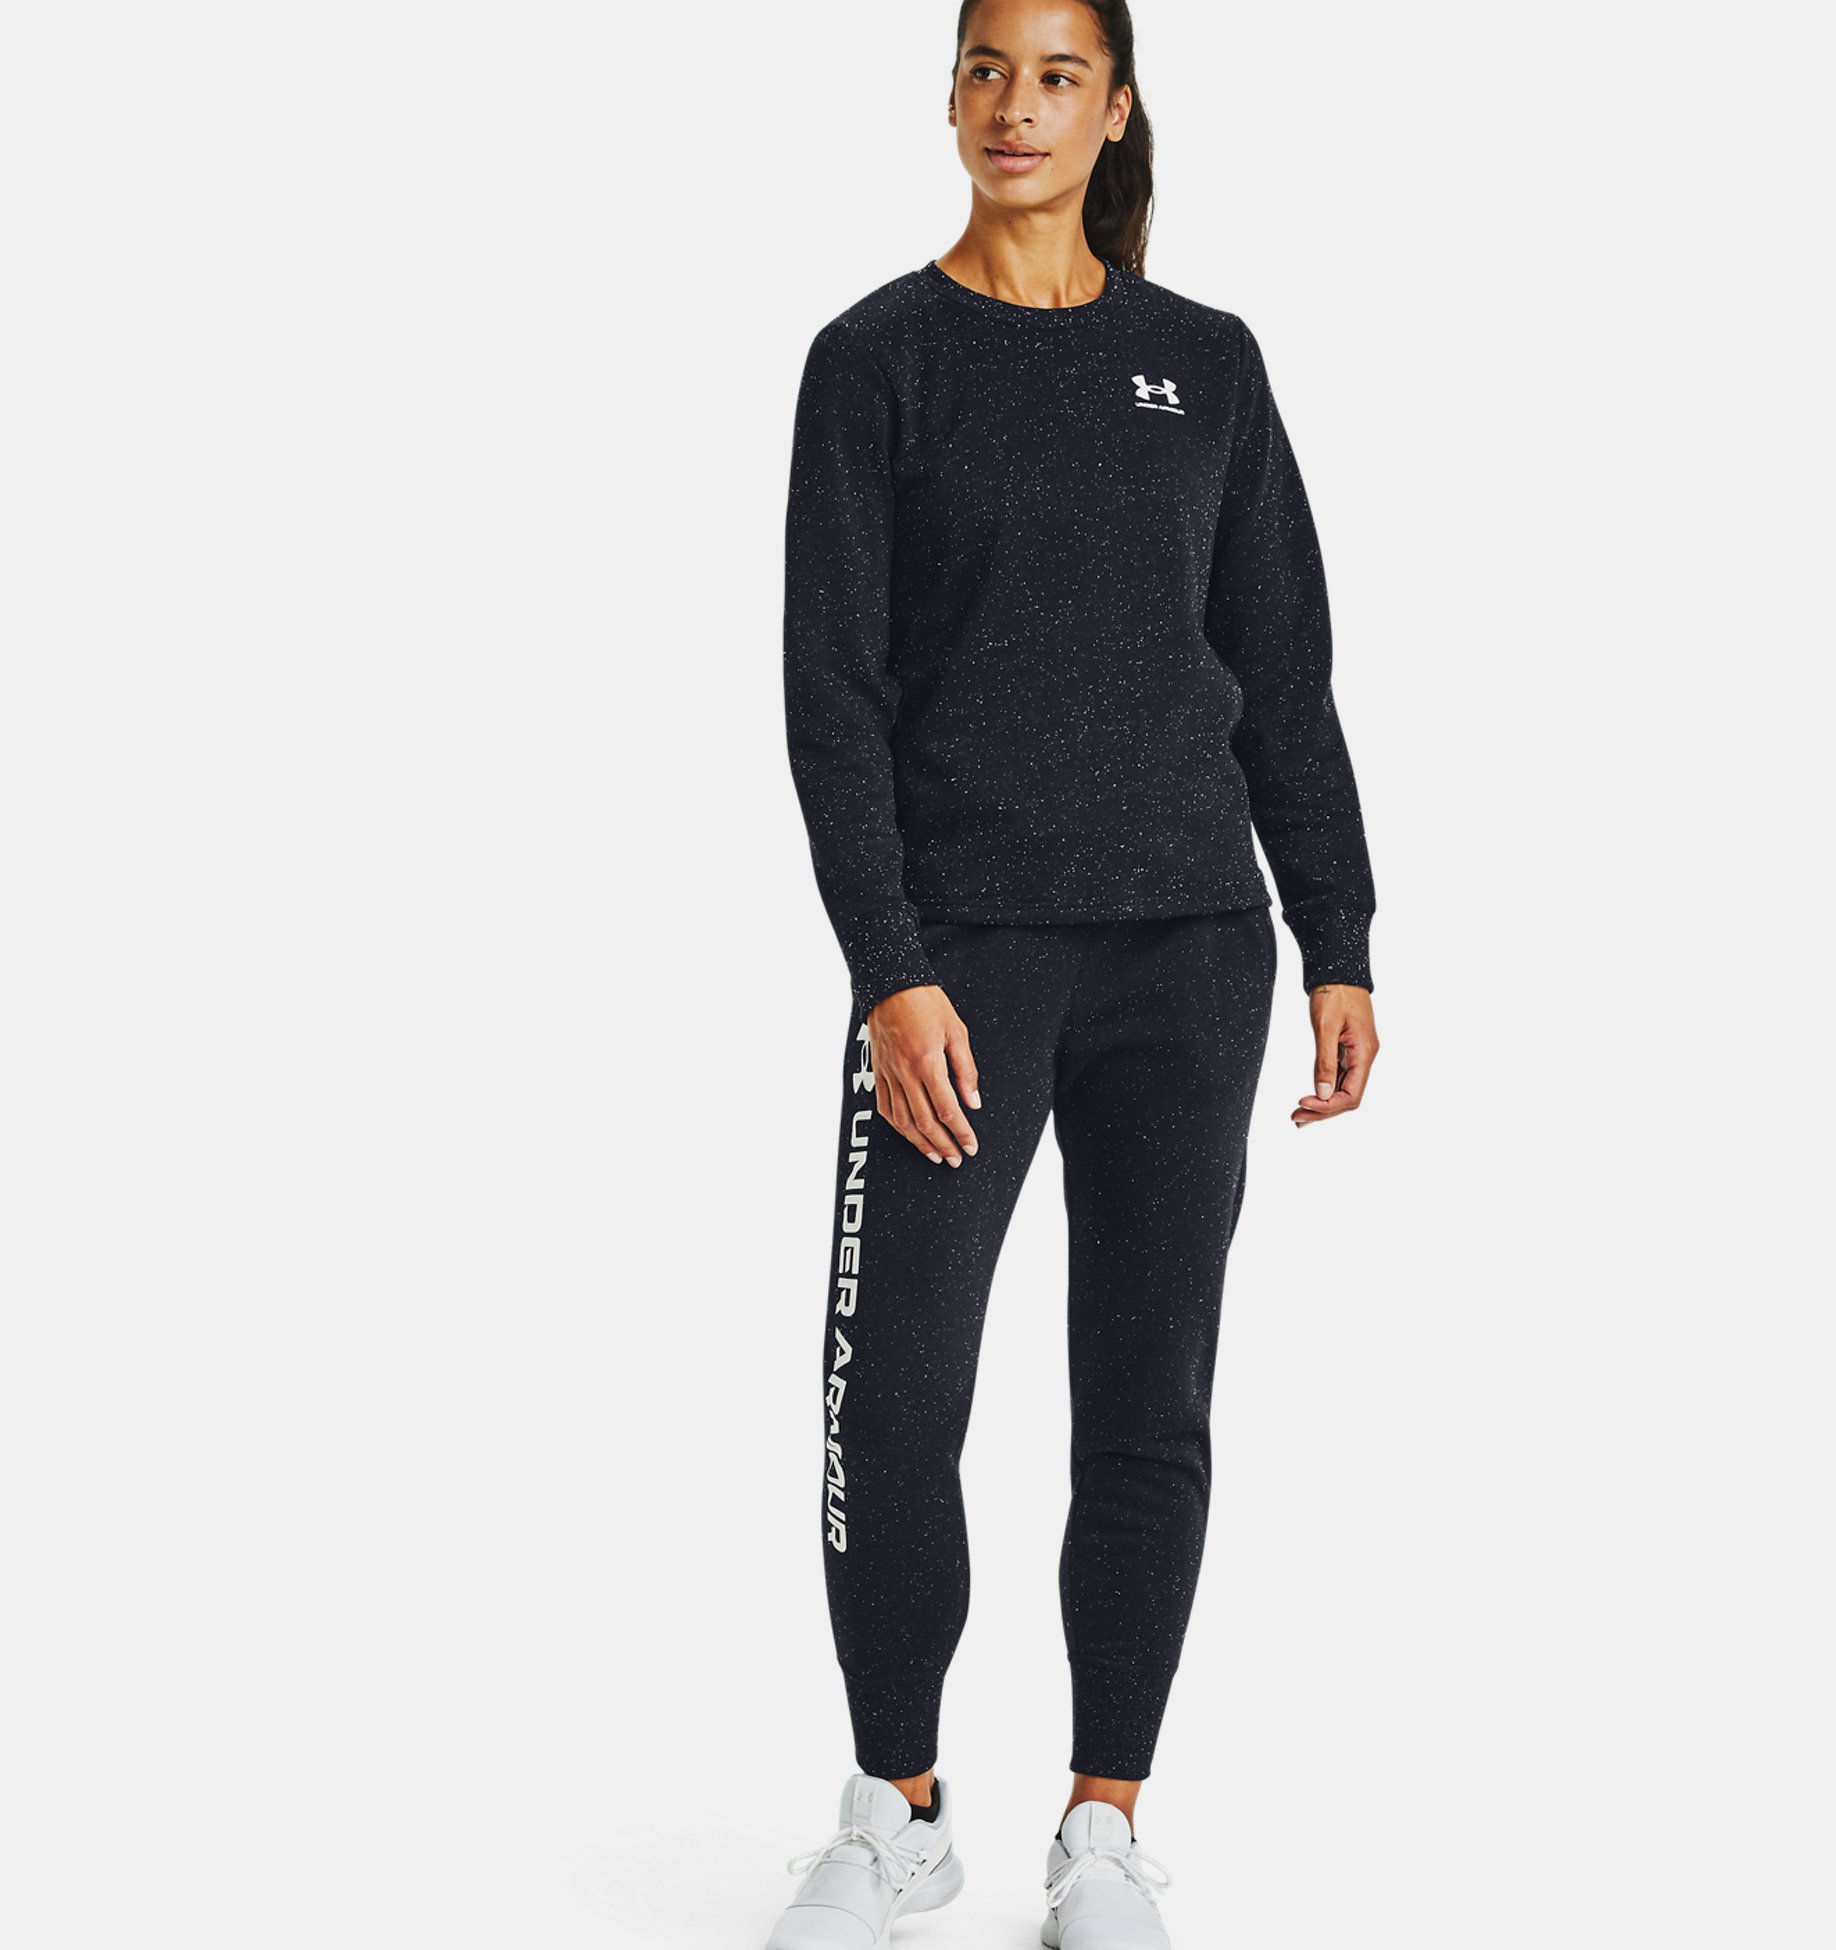 Under Armour Womens Rival Fleece Graphic Lc Crew Warm-up Top 